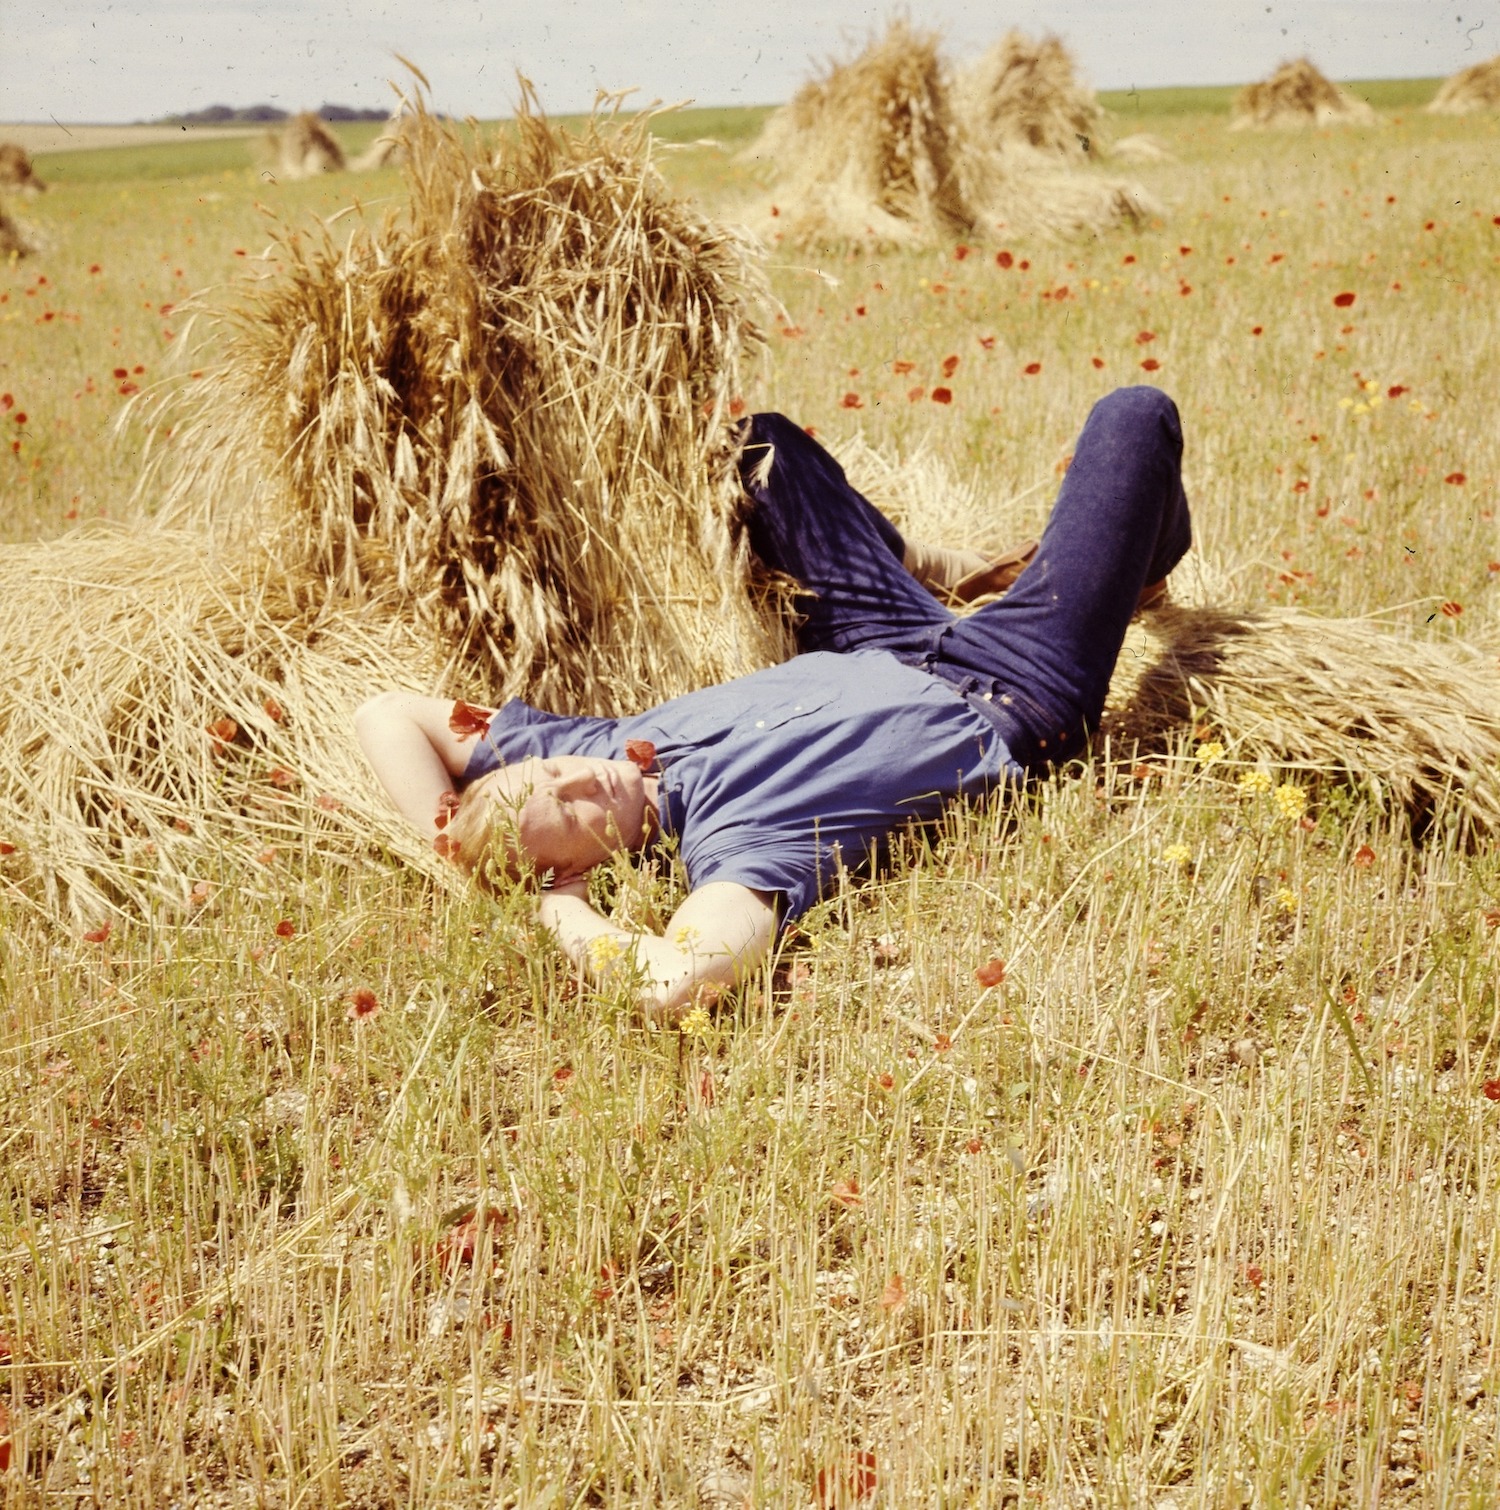 Portrait of American Olympic fencer Kin Hoitsma laying down in a field. *** Local Caption *** Kin Hoitsma;